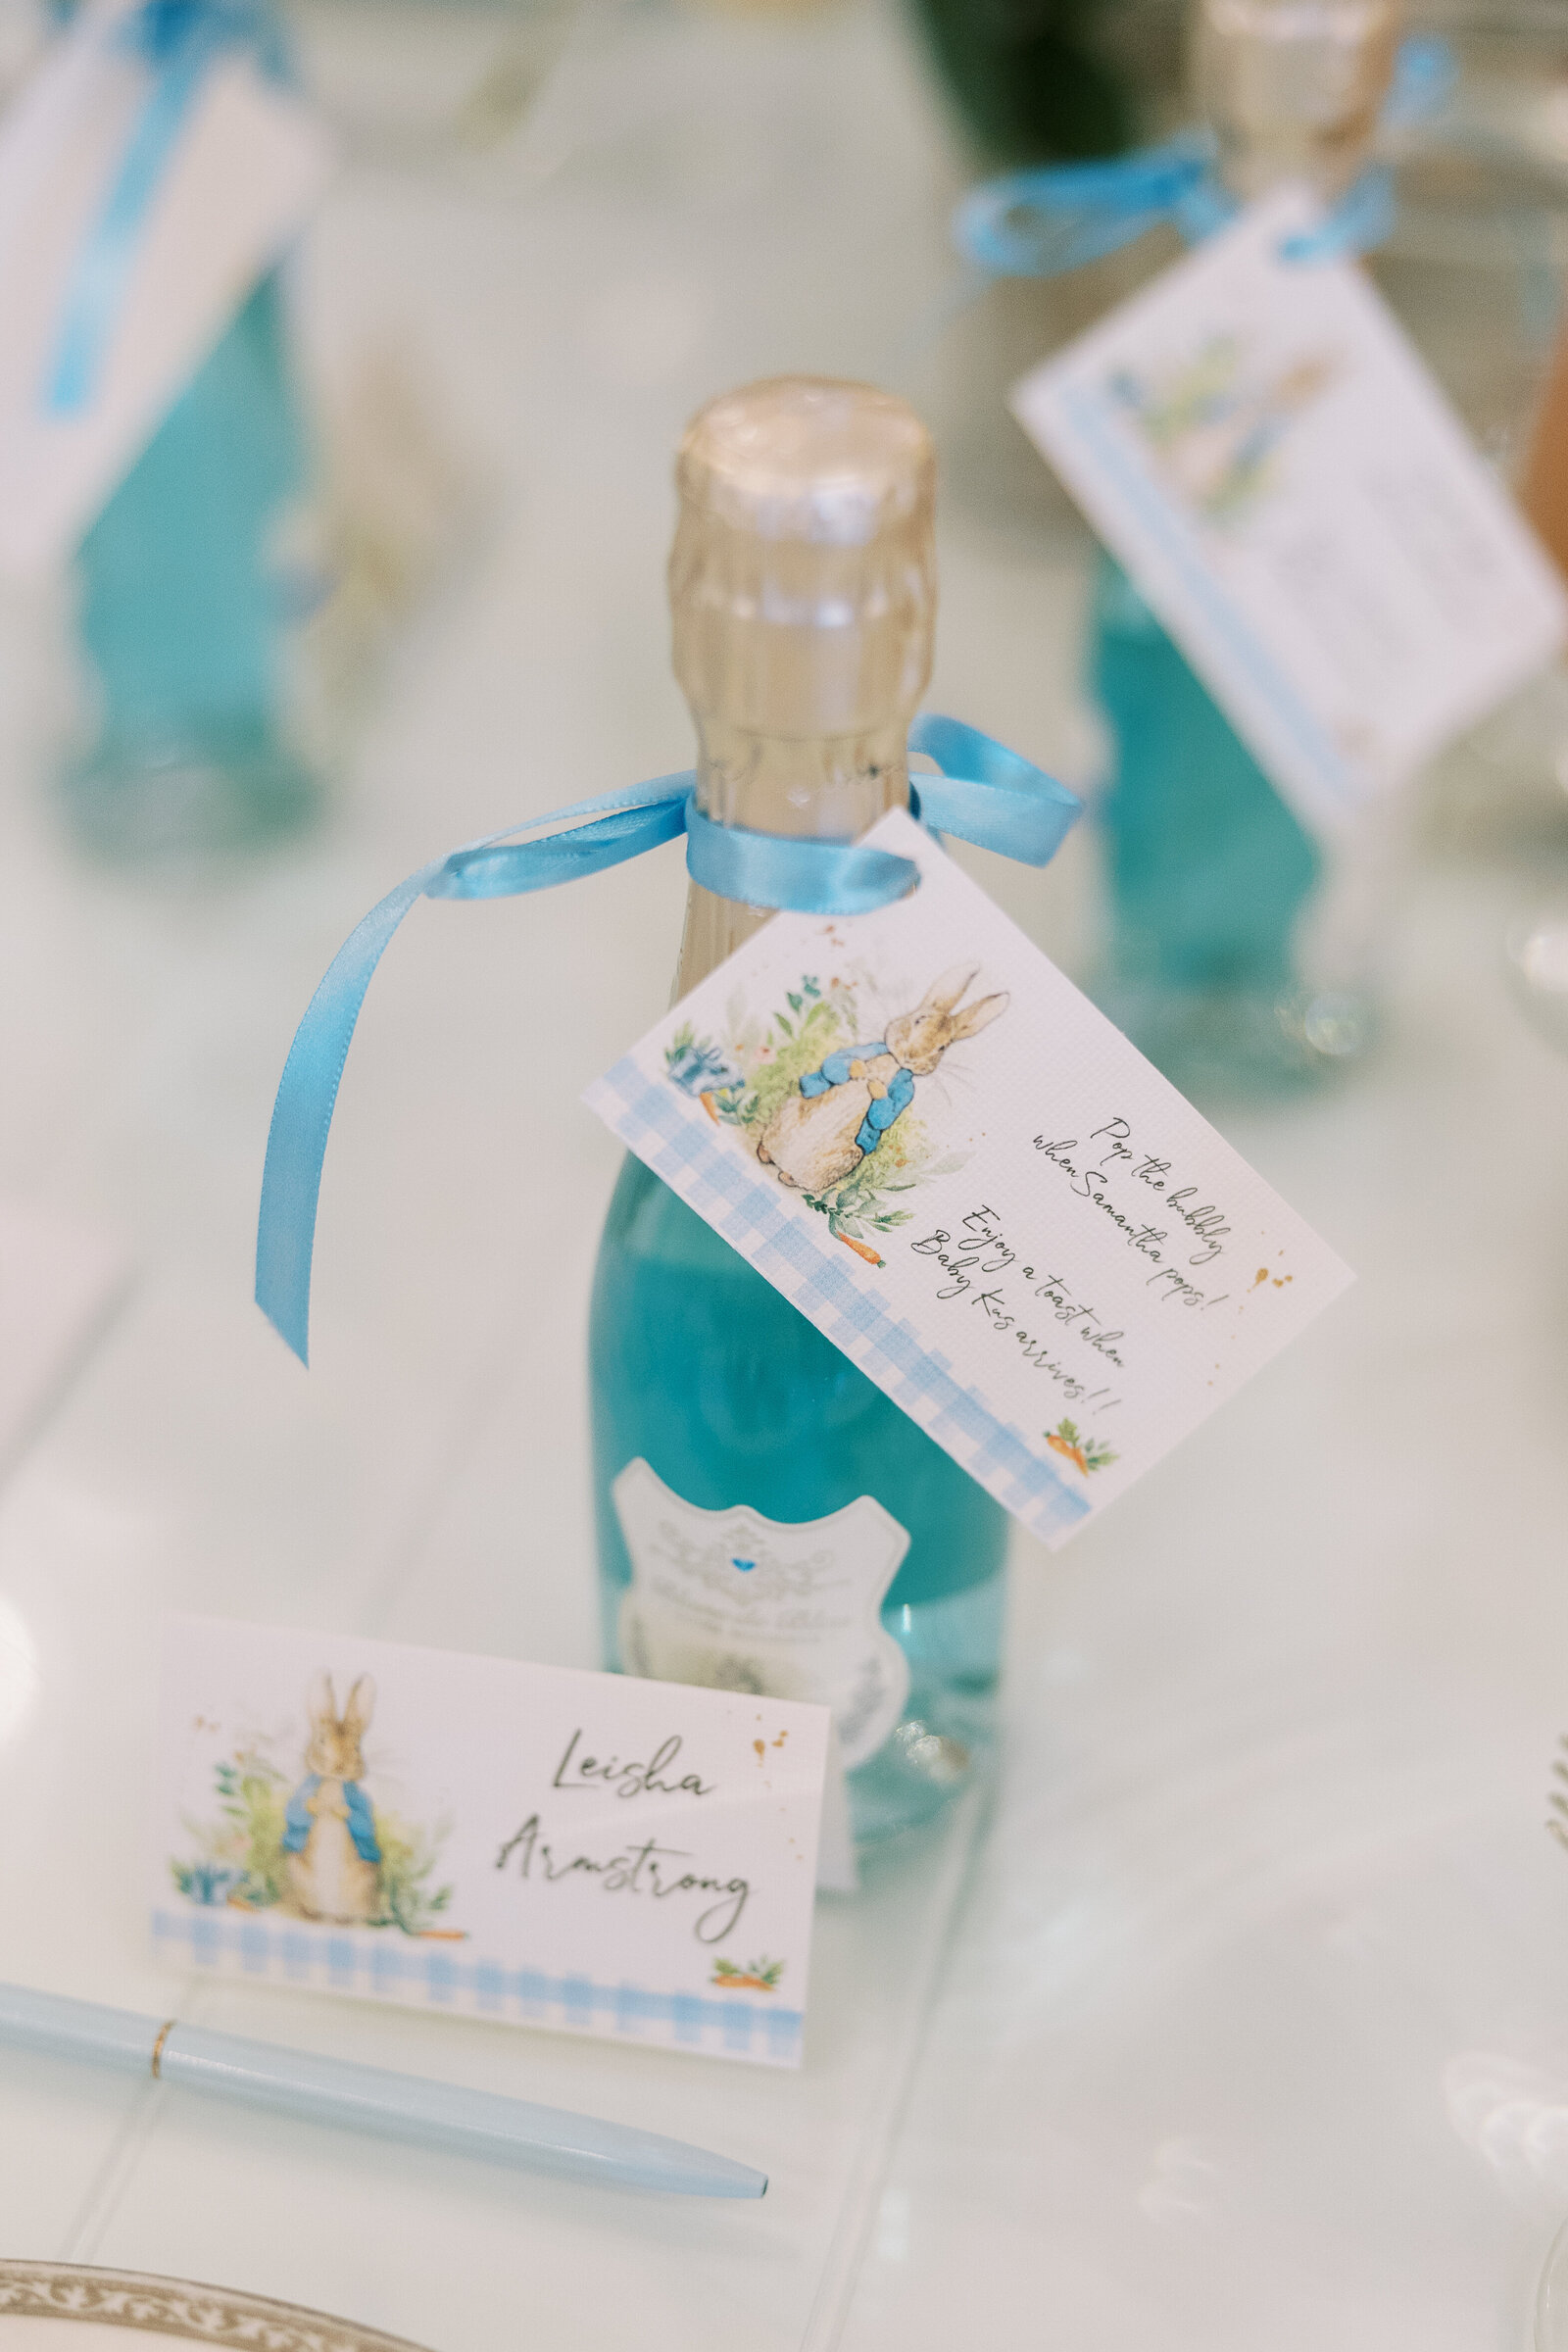 photo of mini champagne bottle party favors for a baby shower at Cake Bake in Carmel, Indiana